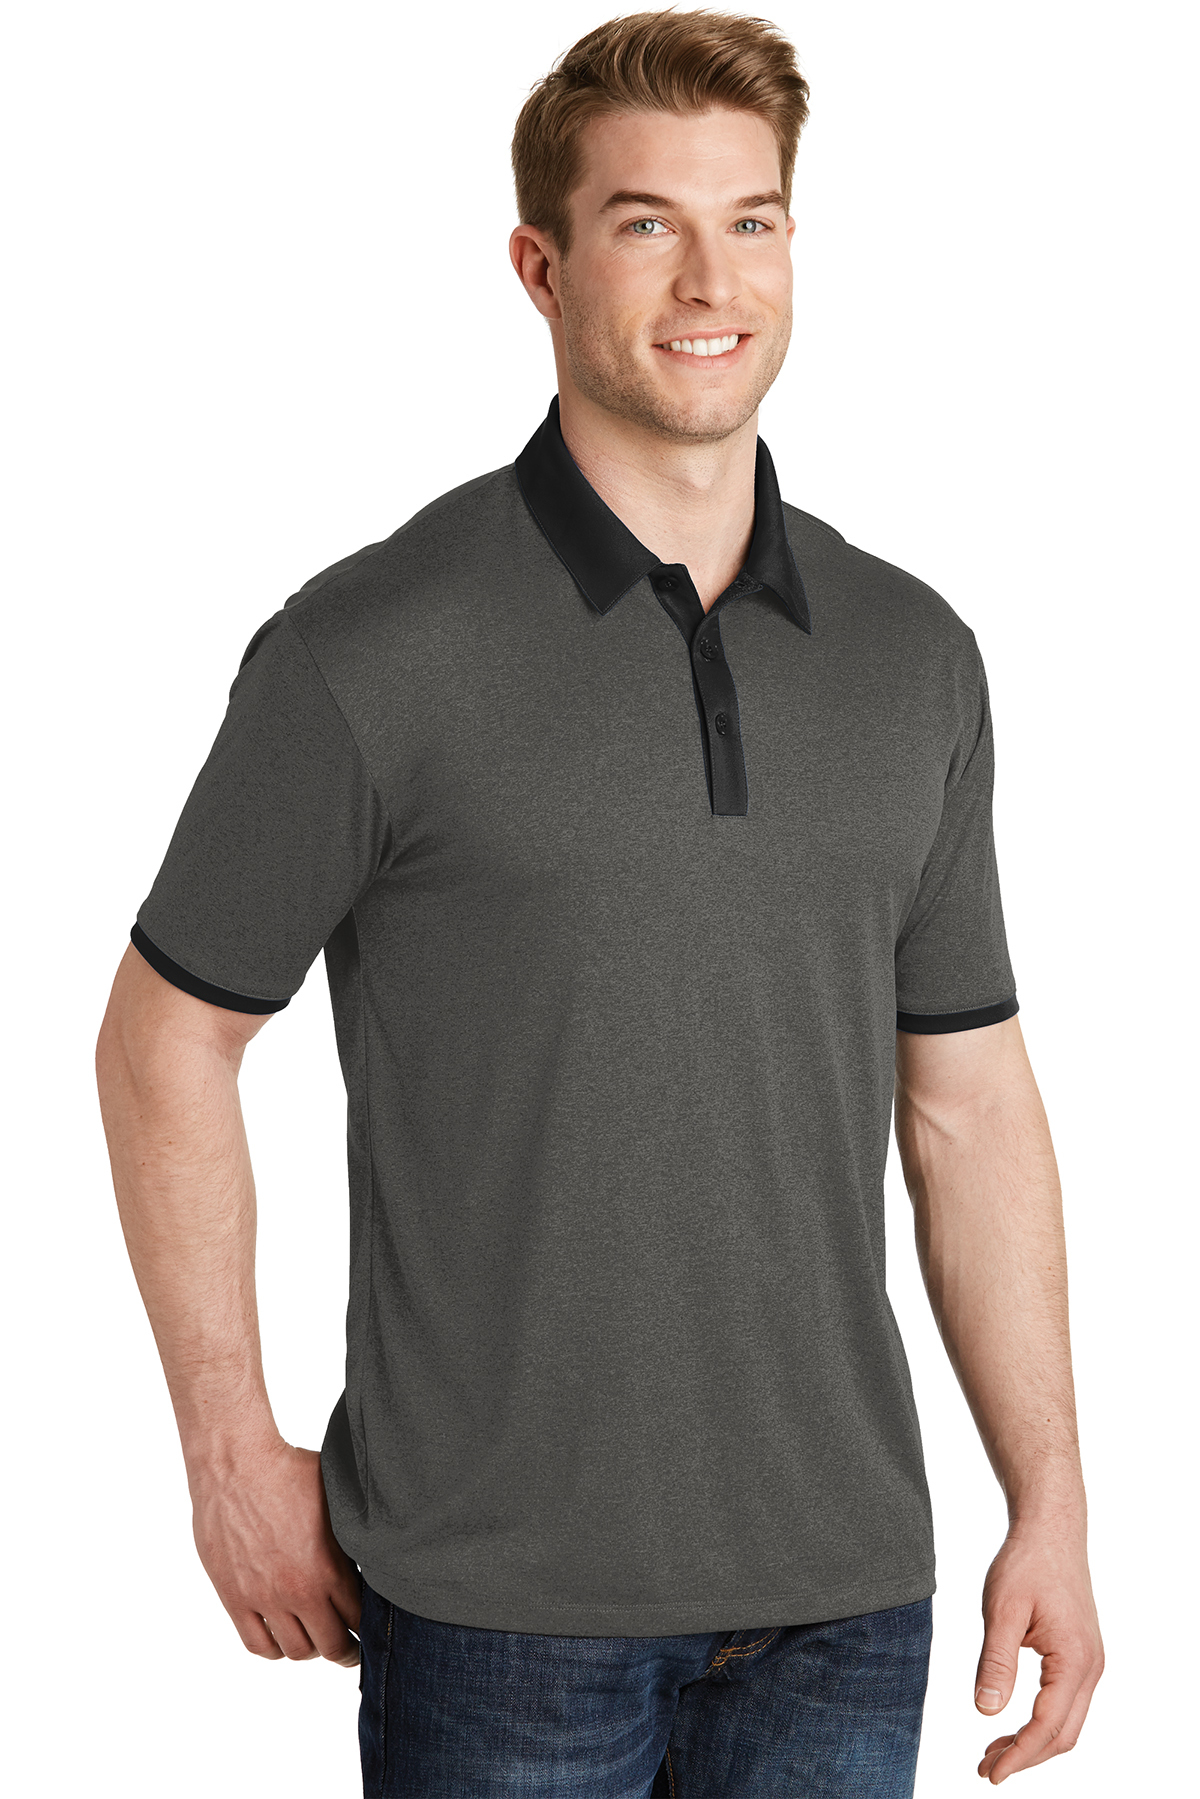 Download Sport-Tek® Heather Contender™ Contrast Polo | Performance | Polos/Knits | SanMar